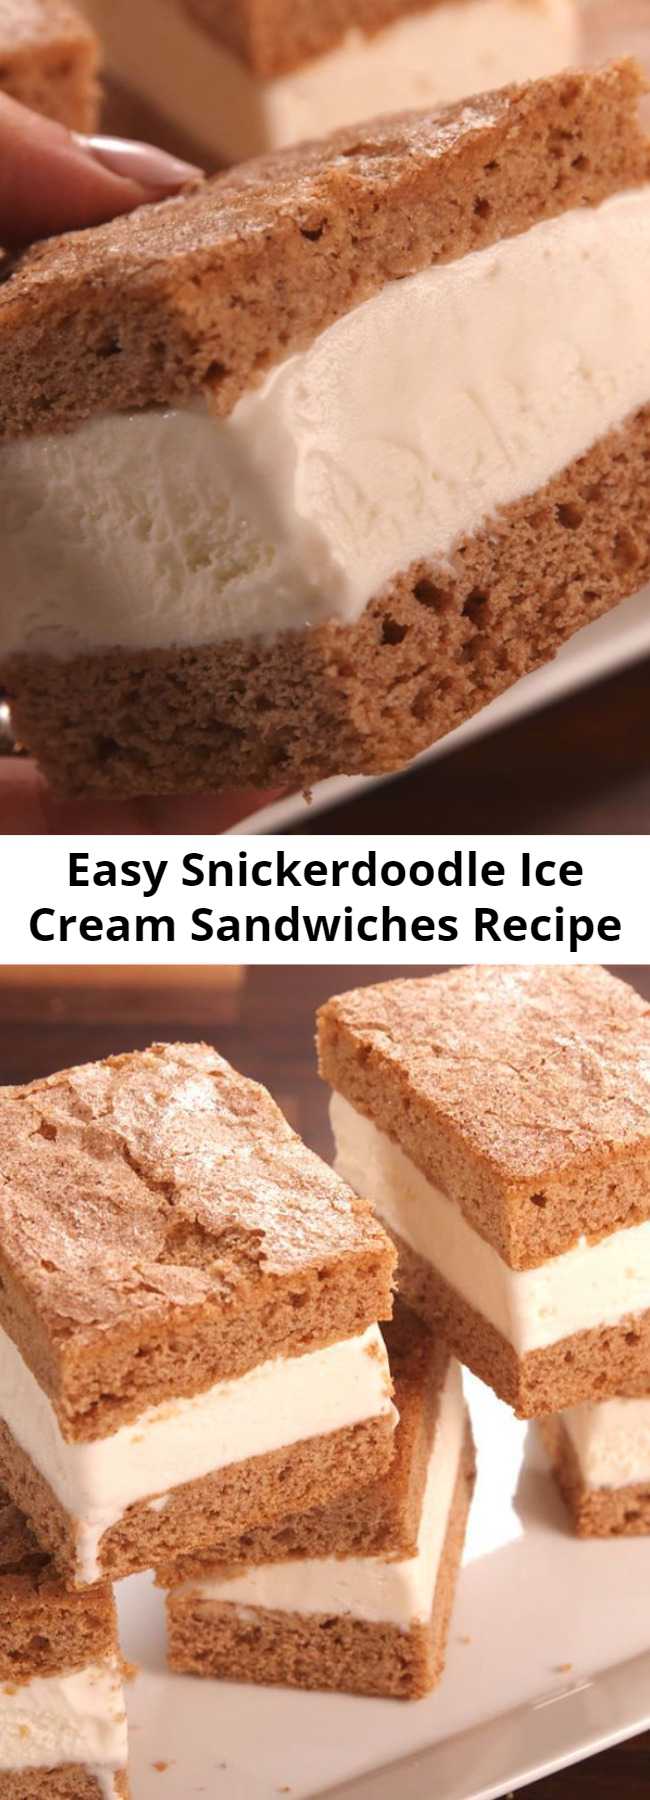 Easy Snickerdoodle Ice Cream Sandwiches Recipe - Who needs a chocolate ice cream sandwich when you can have these snickerdoodle. Why have we not done this before?